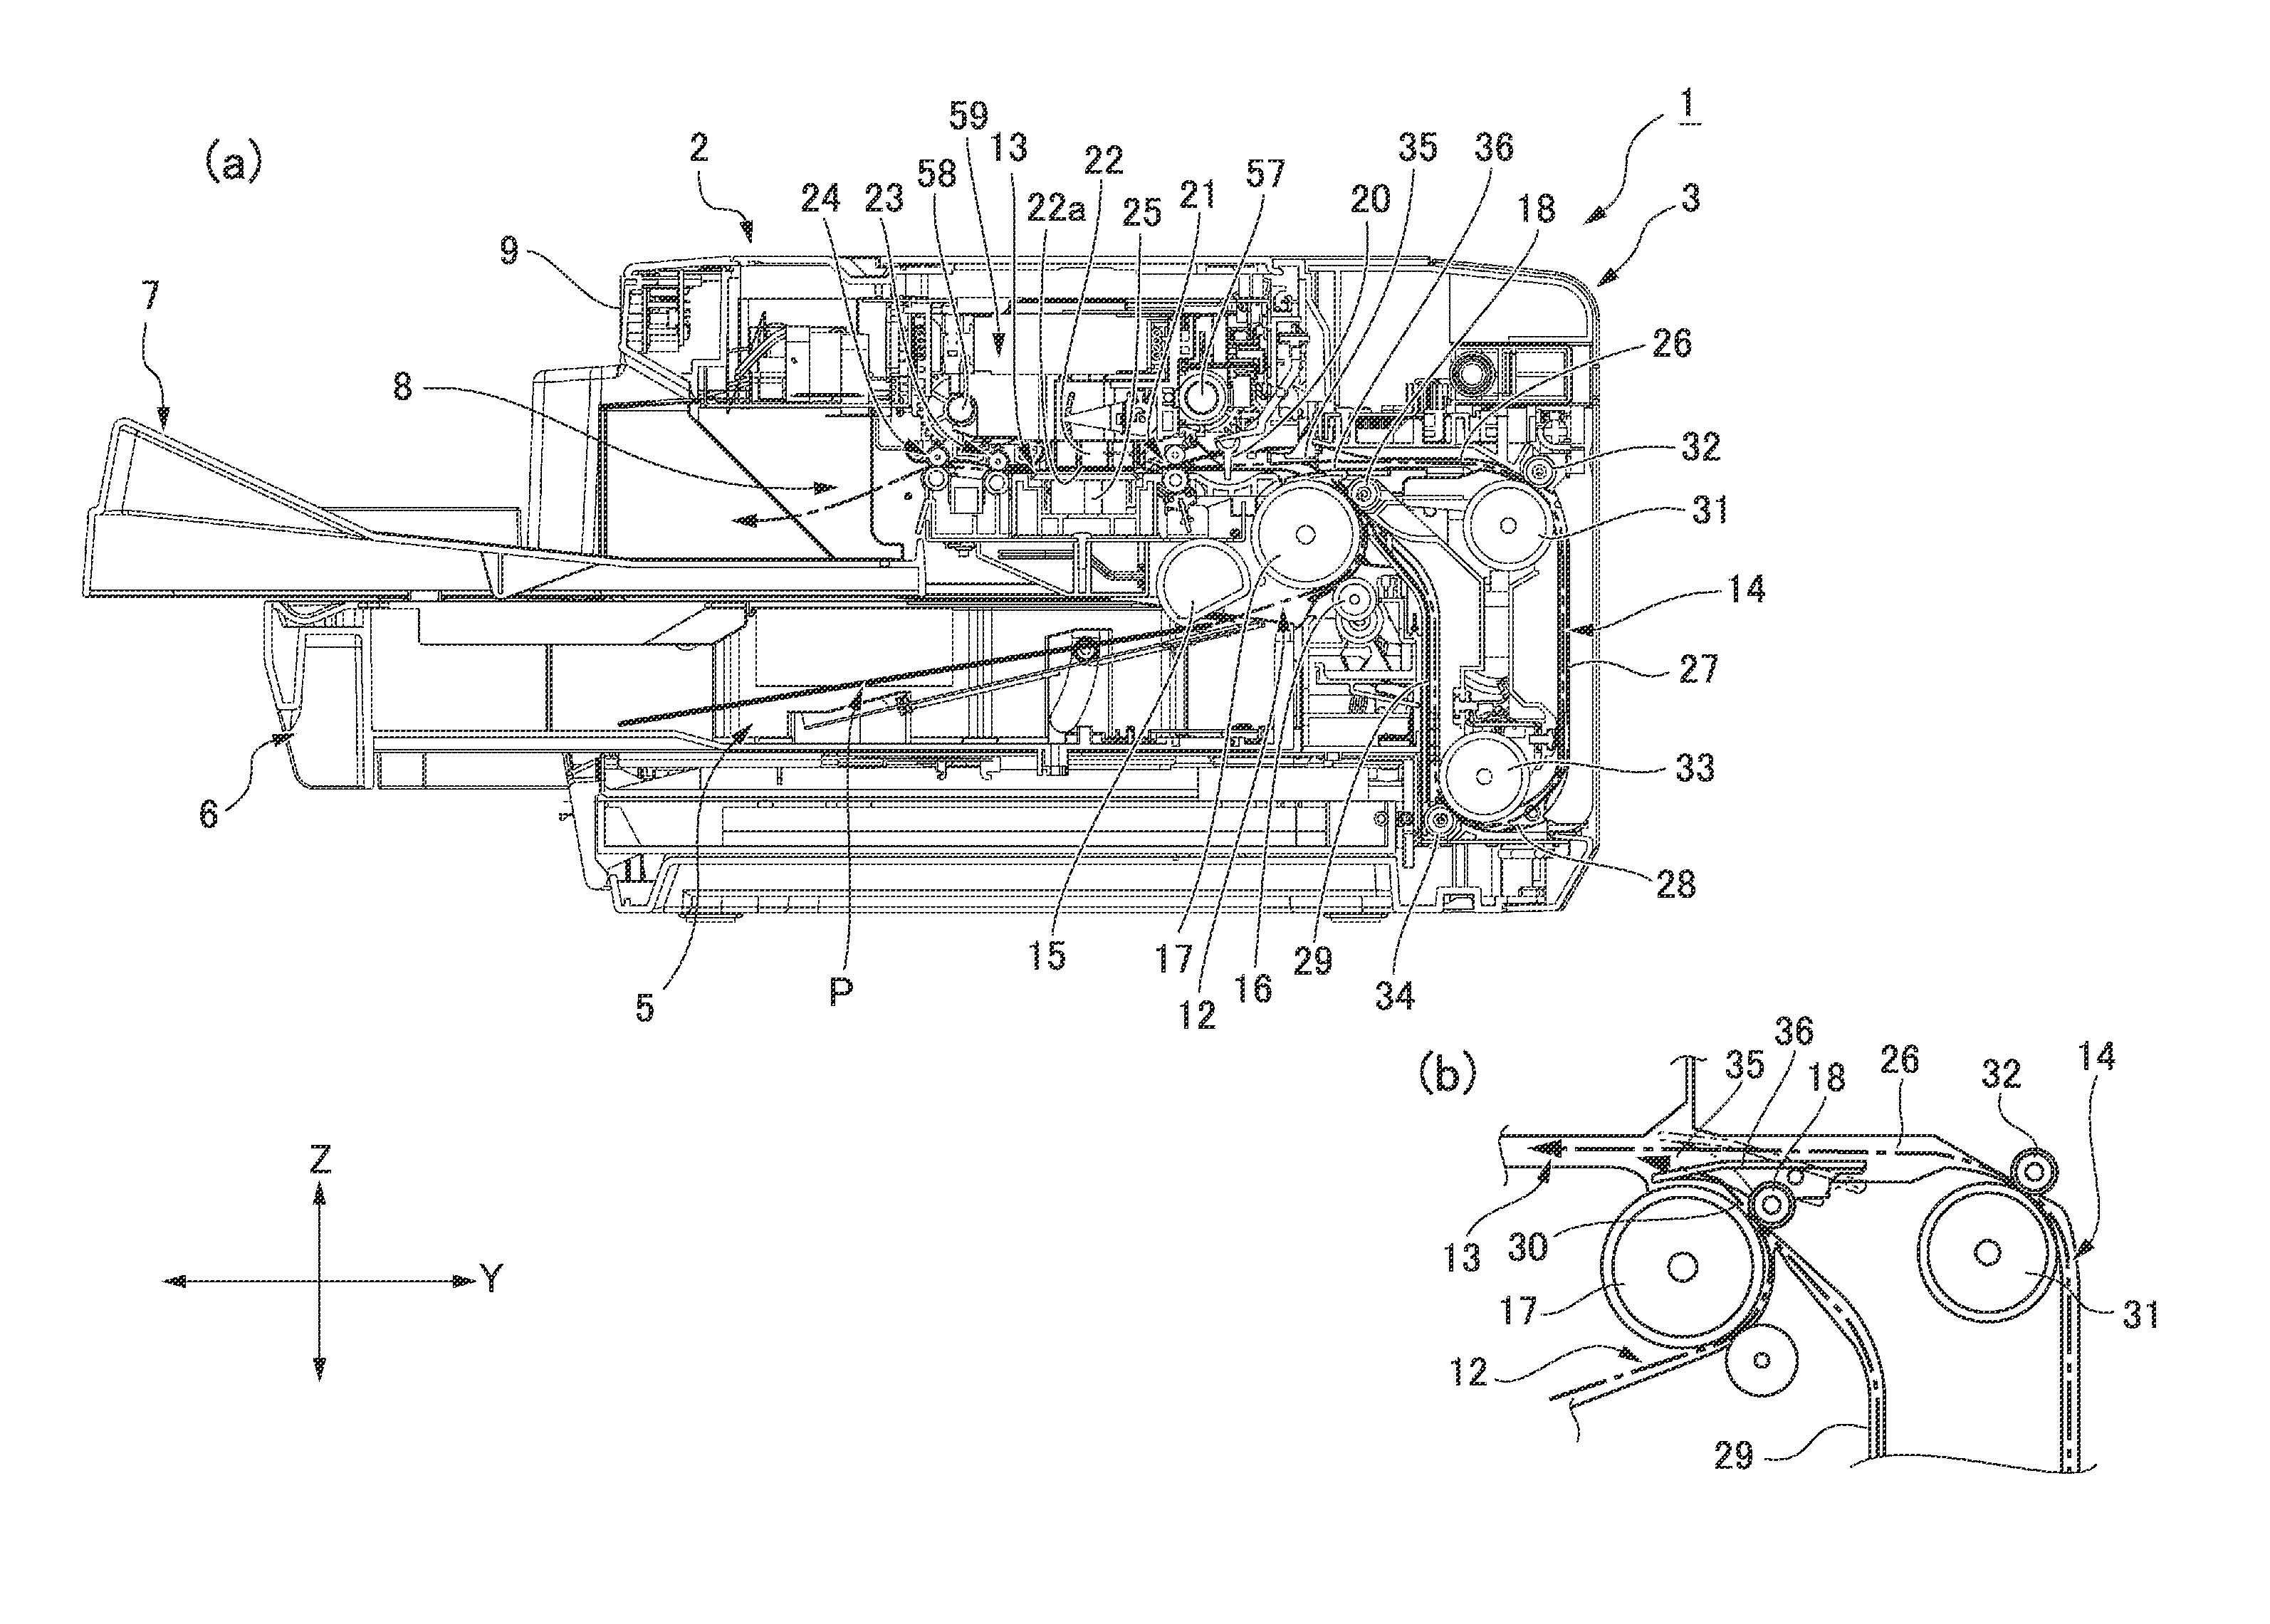 Reference Position Detection Device For Rotary Mechanism, Platen Gap Adjustment Mechanism, And Printer